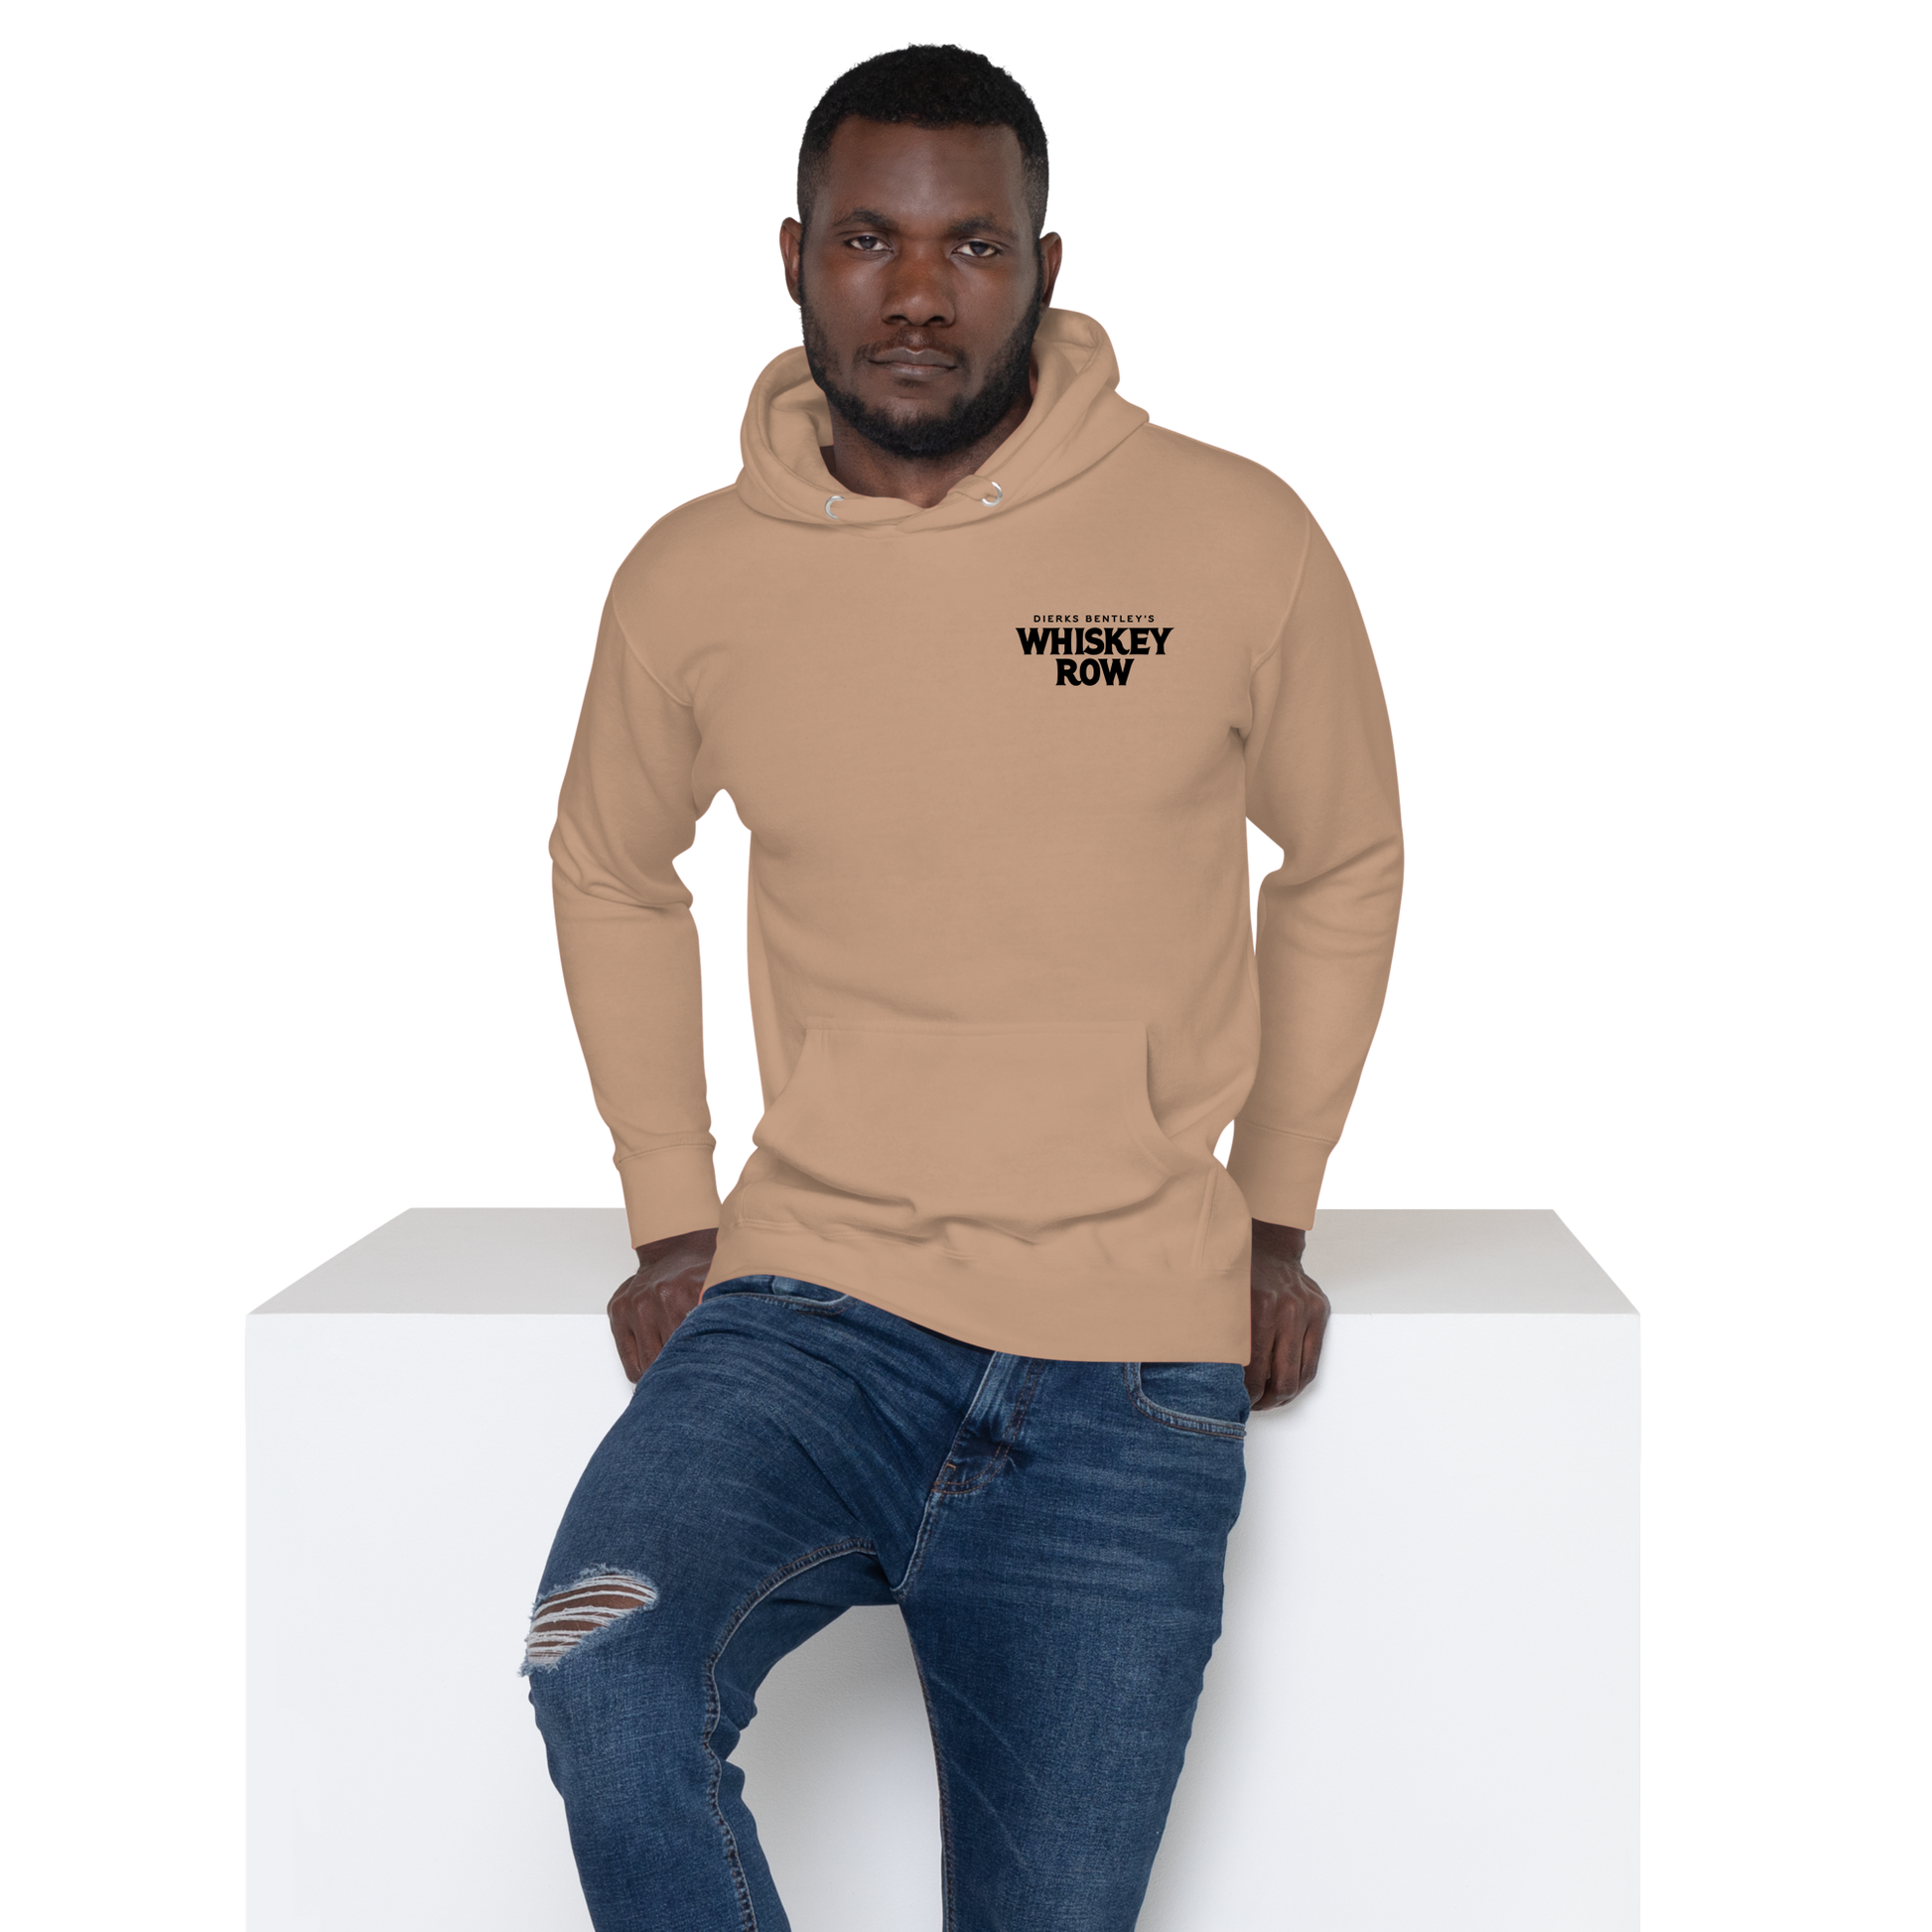 guy wearing Whiskey Row Hoodie sand color front view